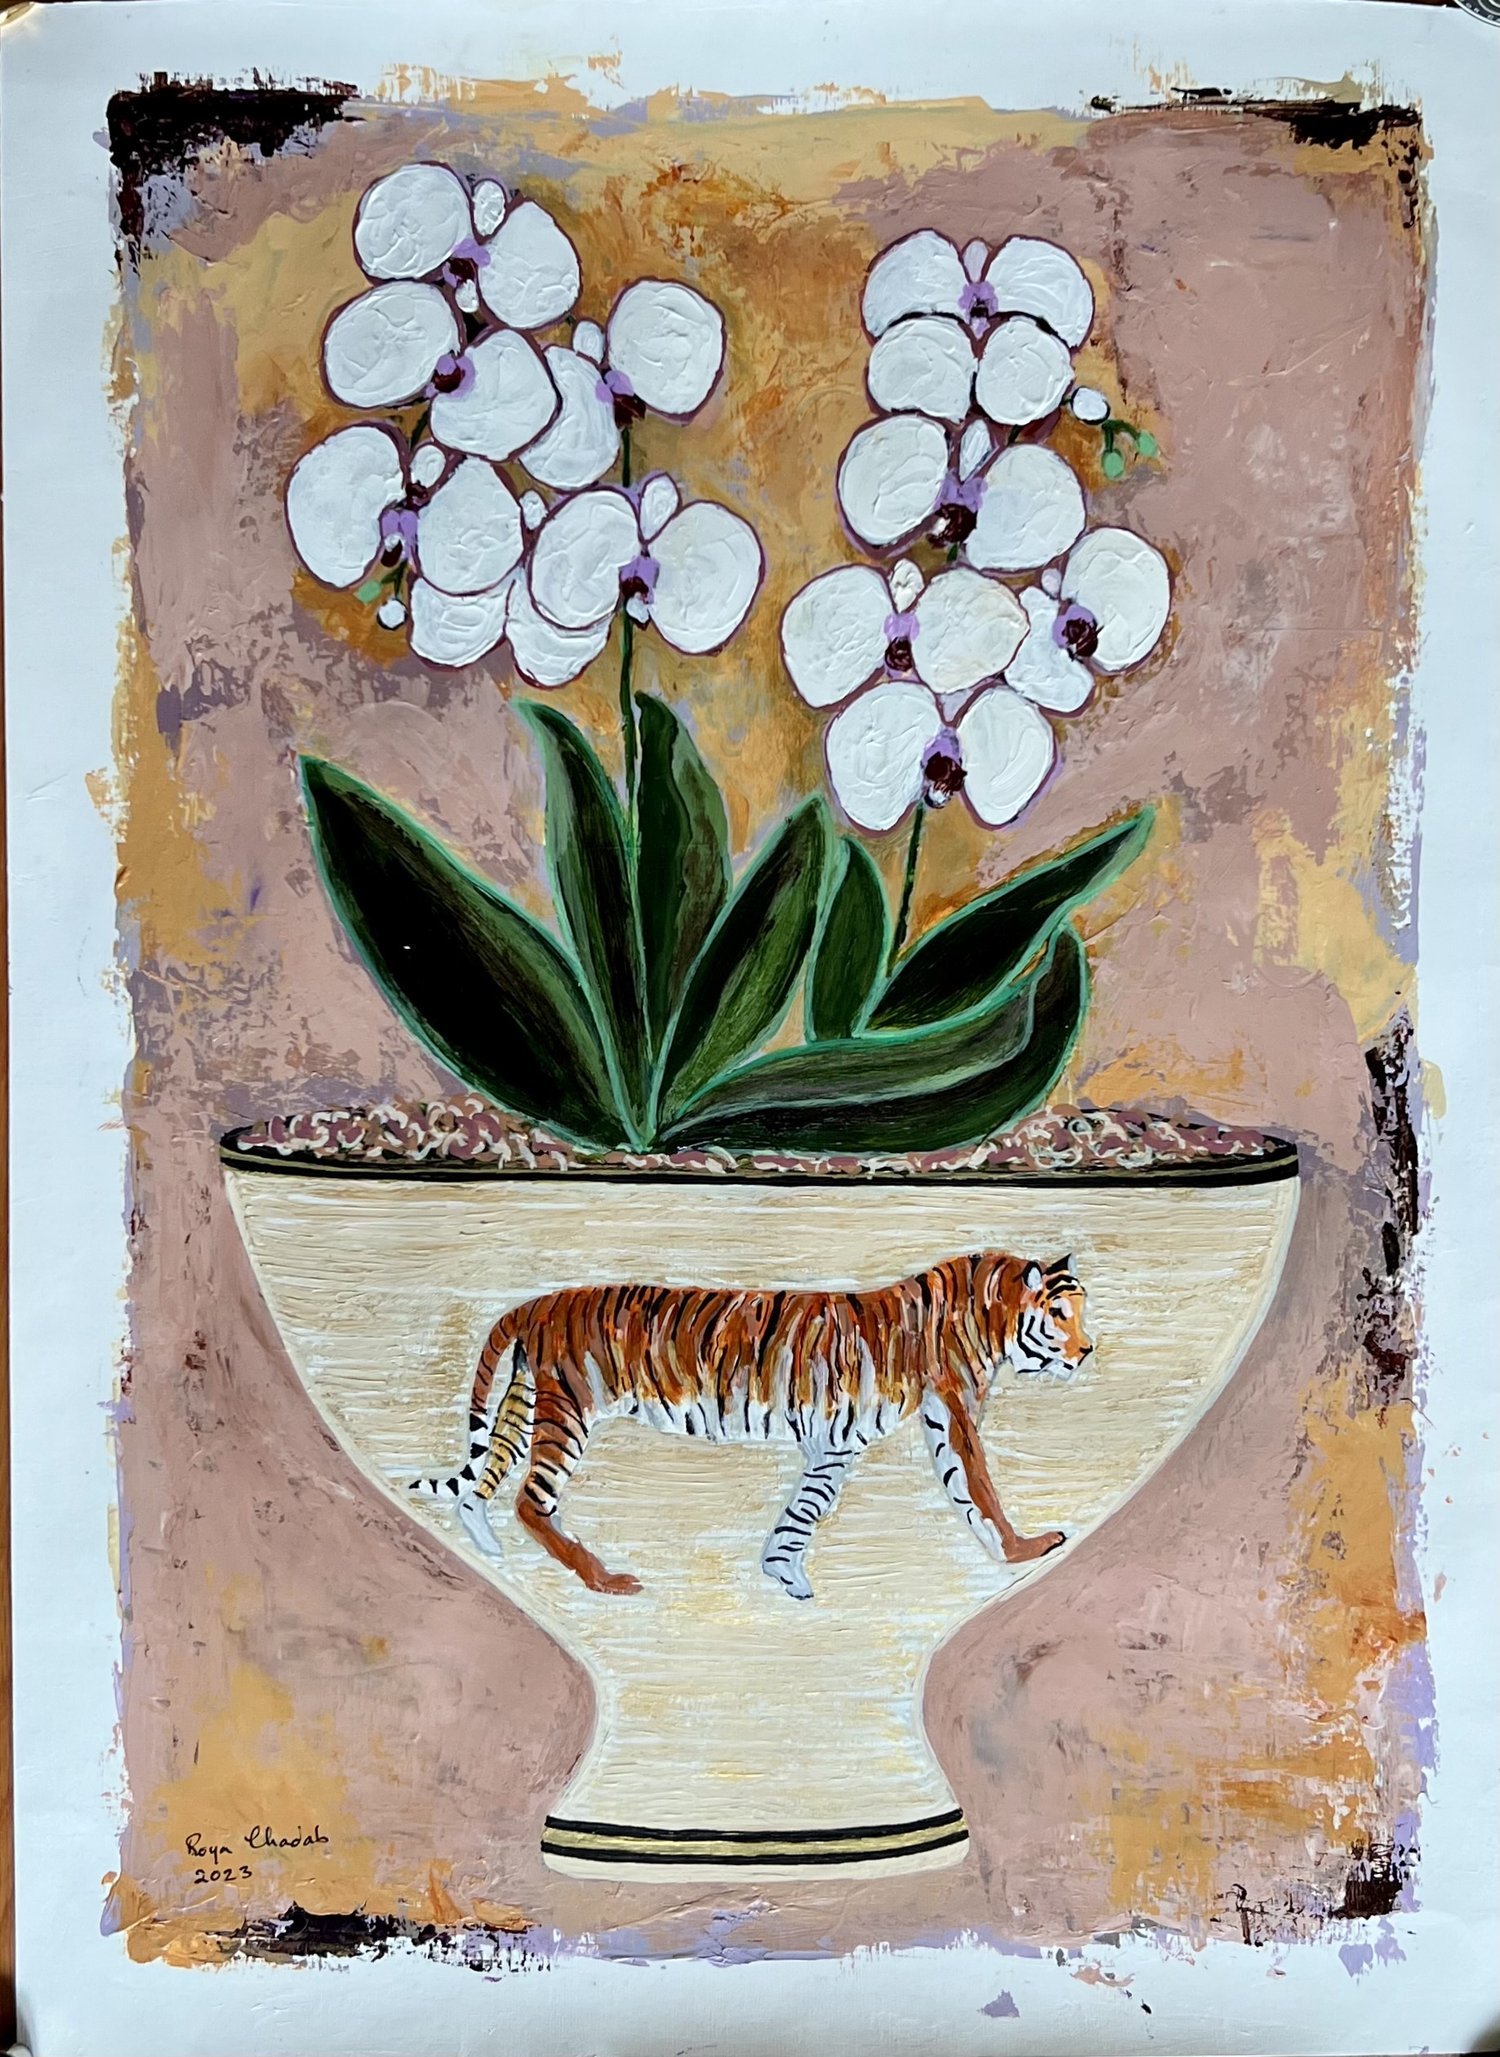   The Tiger and the Orchids by Roya Chadab   18”x 24” unframed, Acrylic and pen on canva paper, 